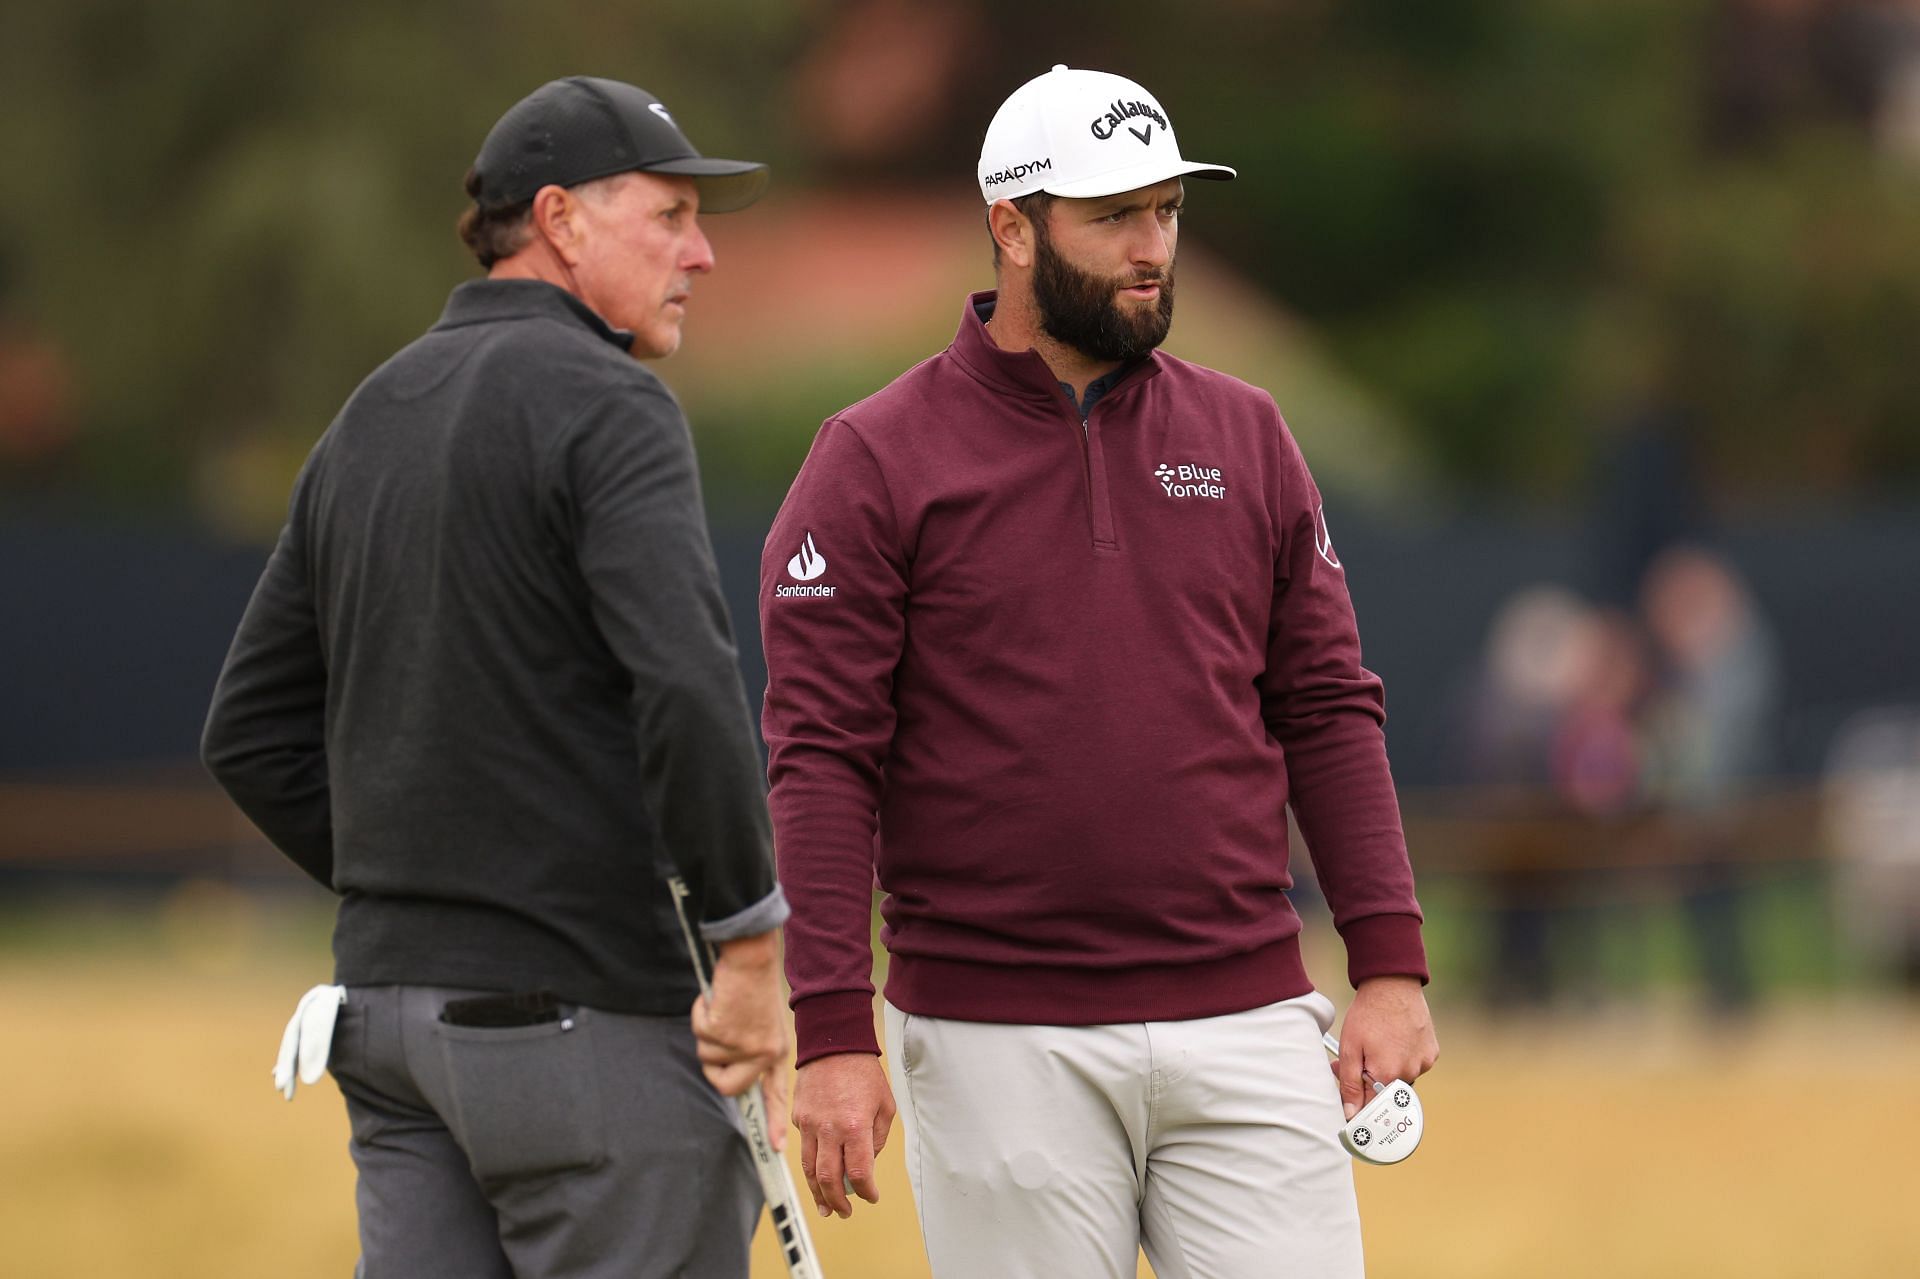 Jon Rahm and Phil Mickelson (via Getty Images)